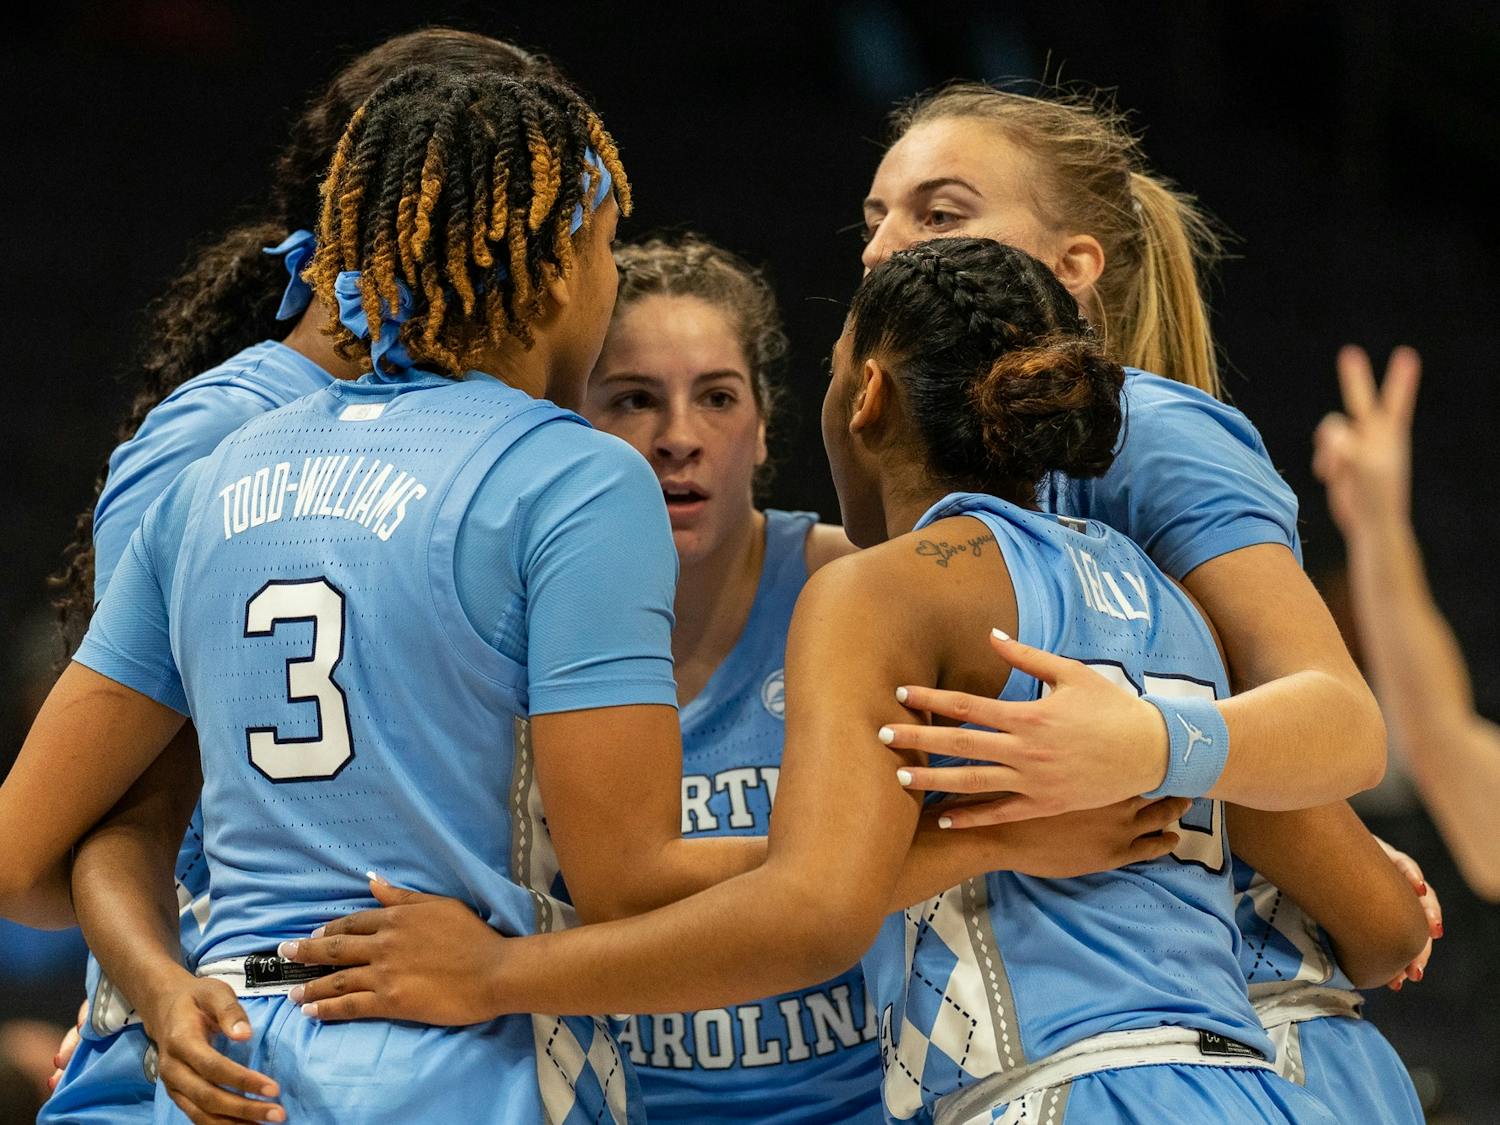 The team huddles up before a free throw during the women’s basketball game against Michigan at the Jumpman Invitational on Tuesday, Dec. 20, 2022, at the Spectrum Center. UNC fell to Michigan 76-68.